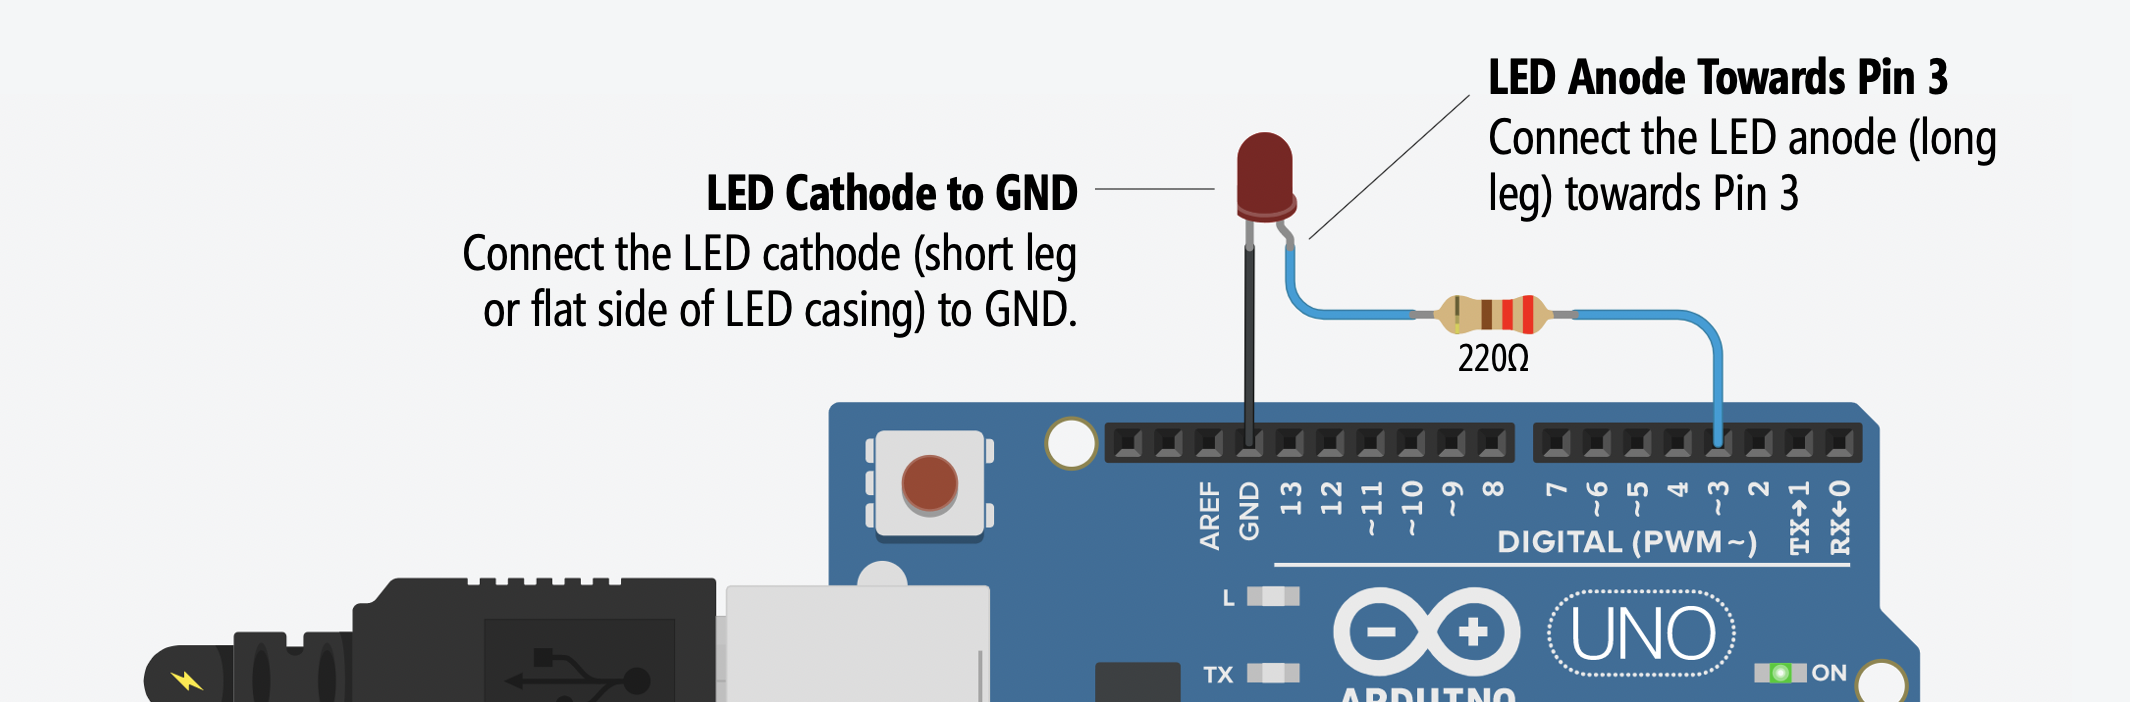 Wiring diagram showing LED cathode wired to GND and LED anode wired to a 220 Ohm resistor and then to Pin 3